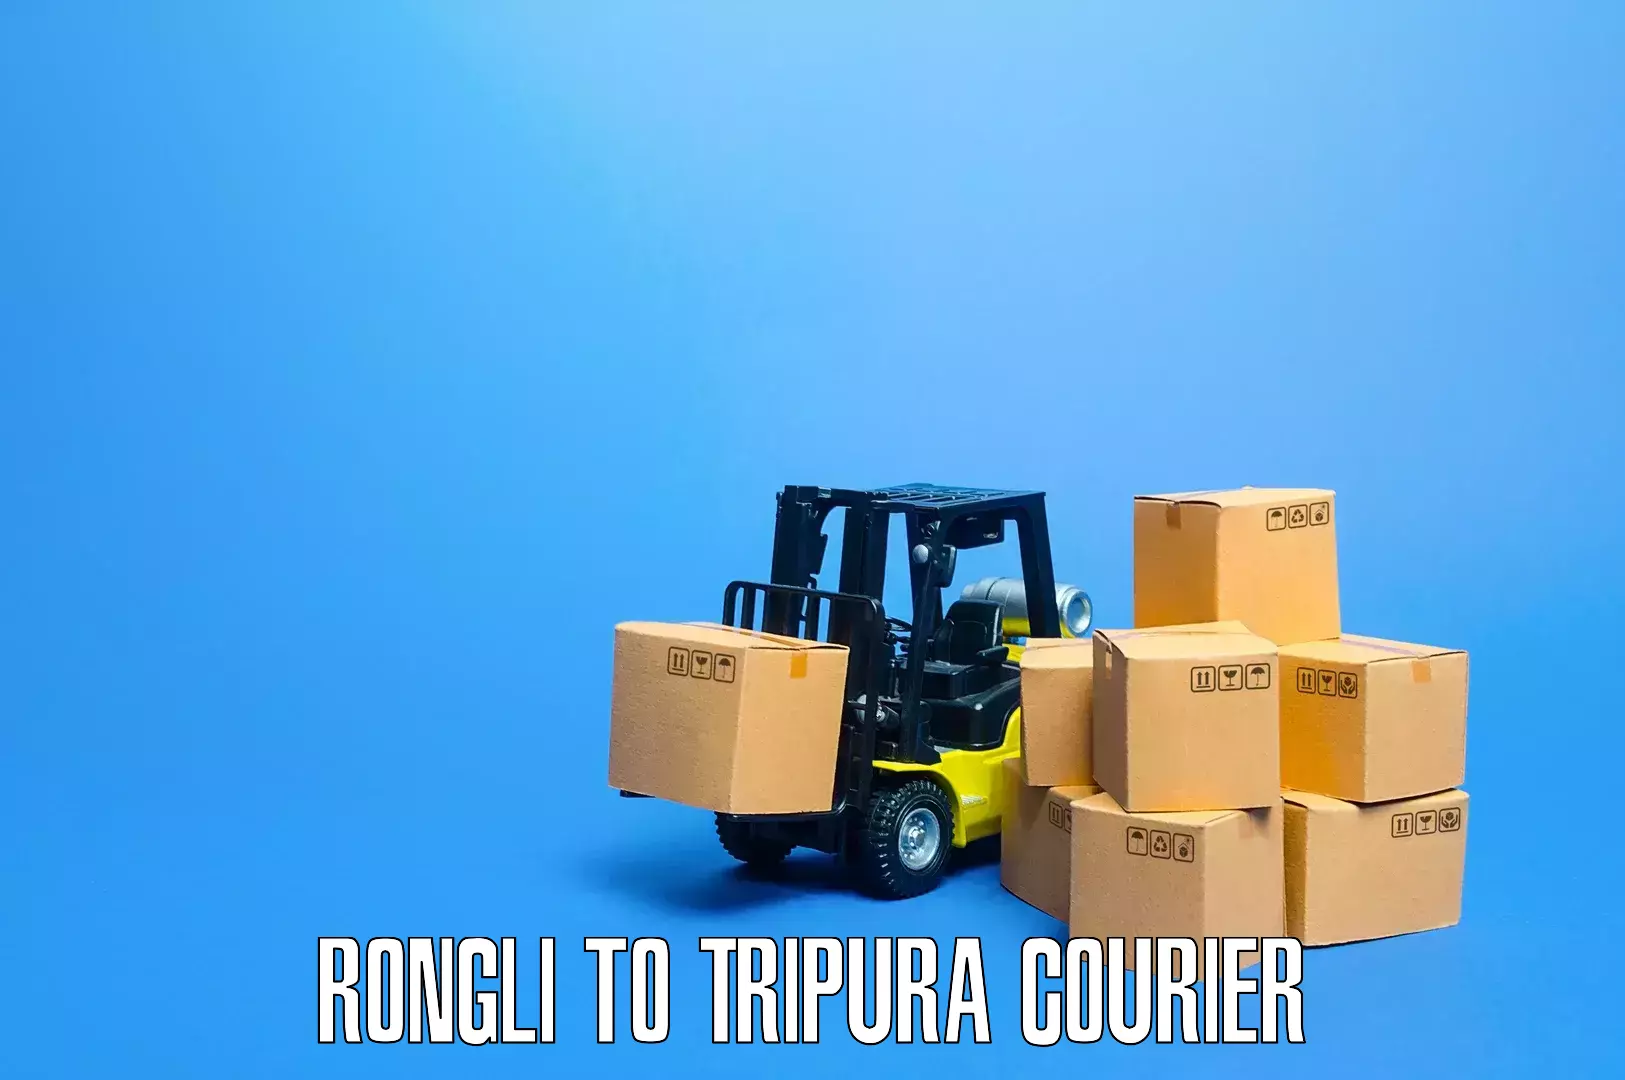 Home relocation experts Rongli to Tripura